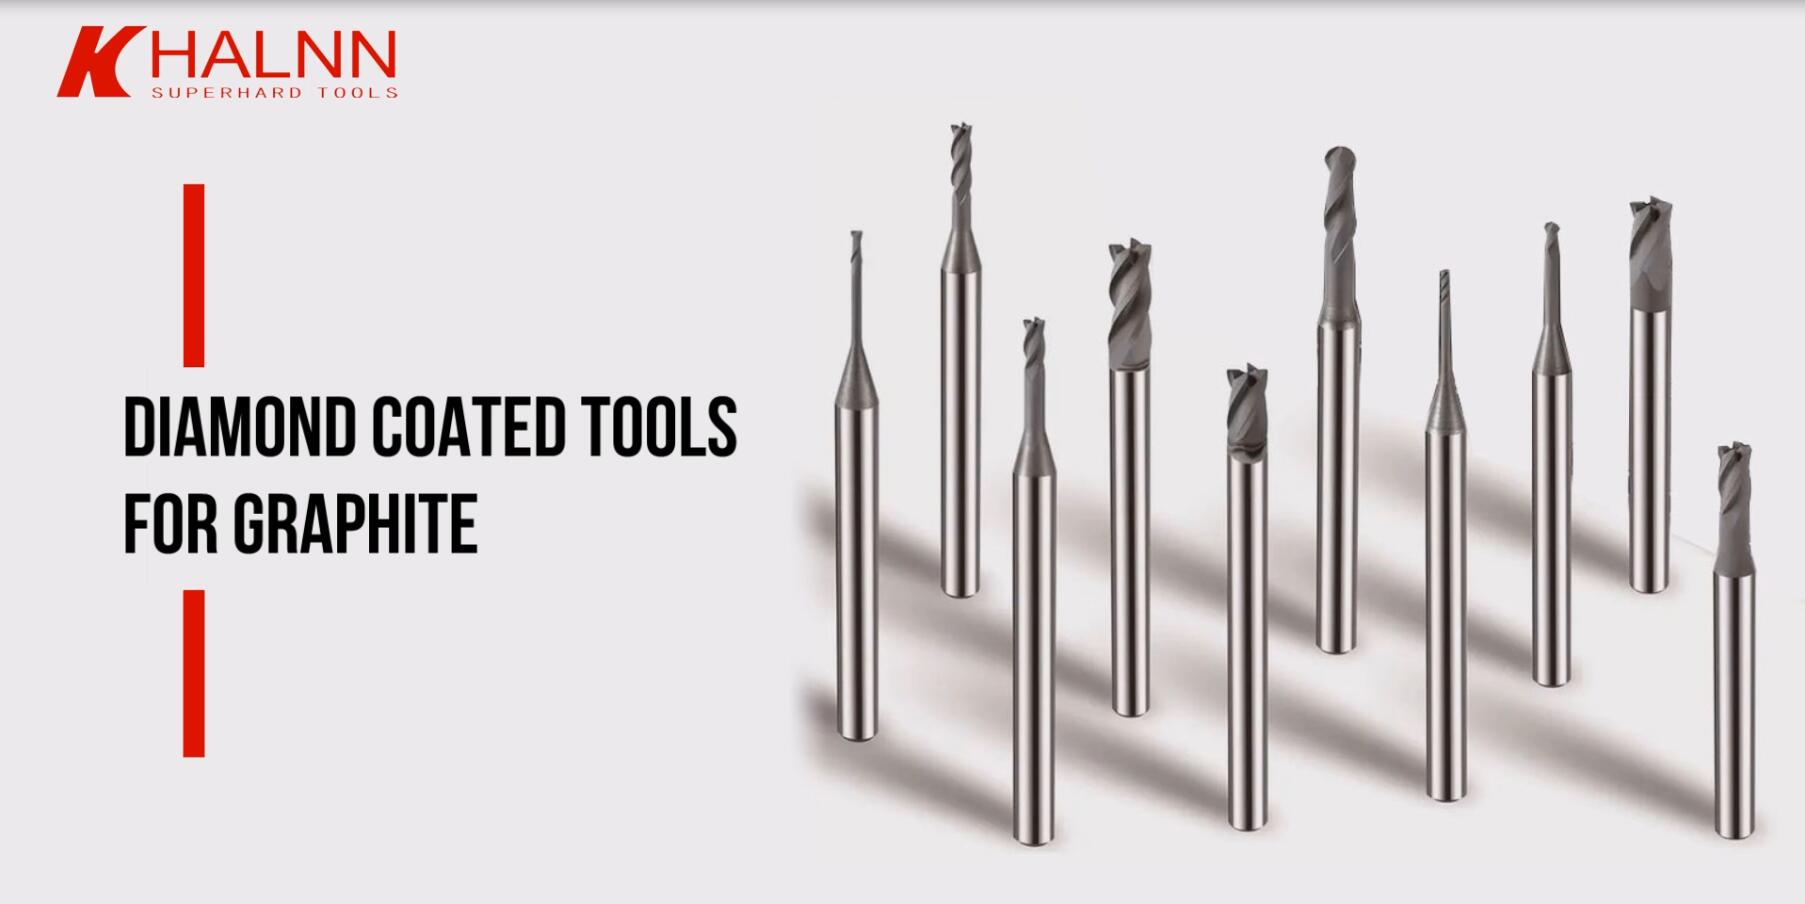 Diamond coated tools for graphite